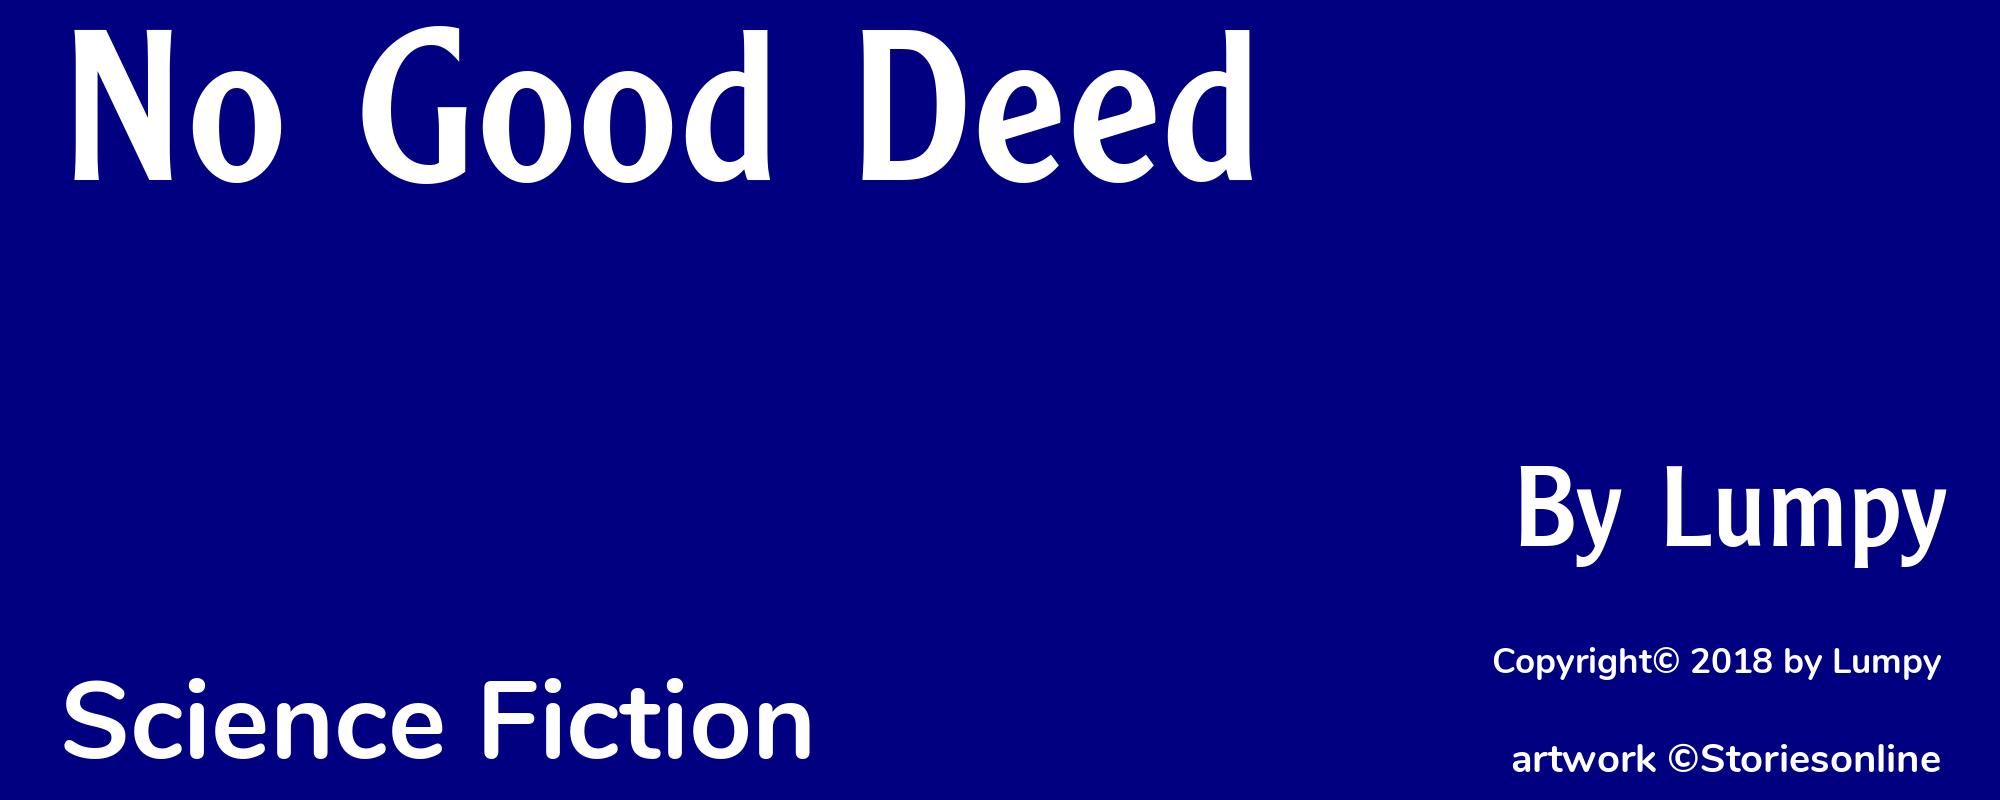 No Good Deed - Cover